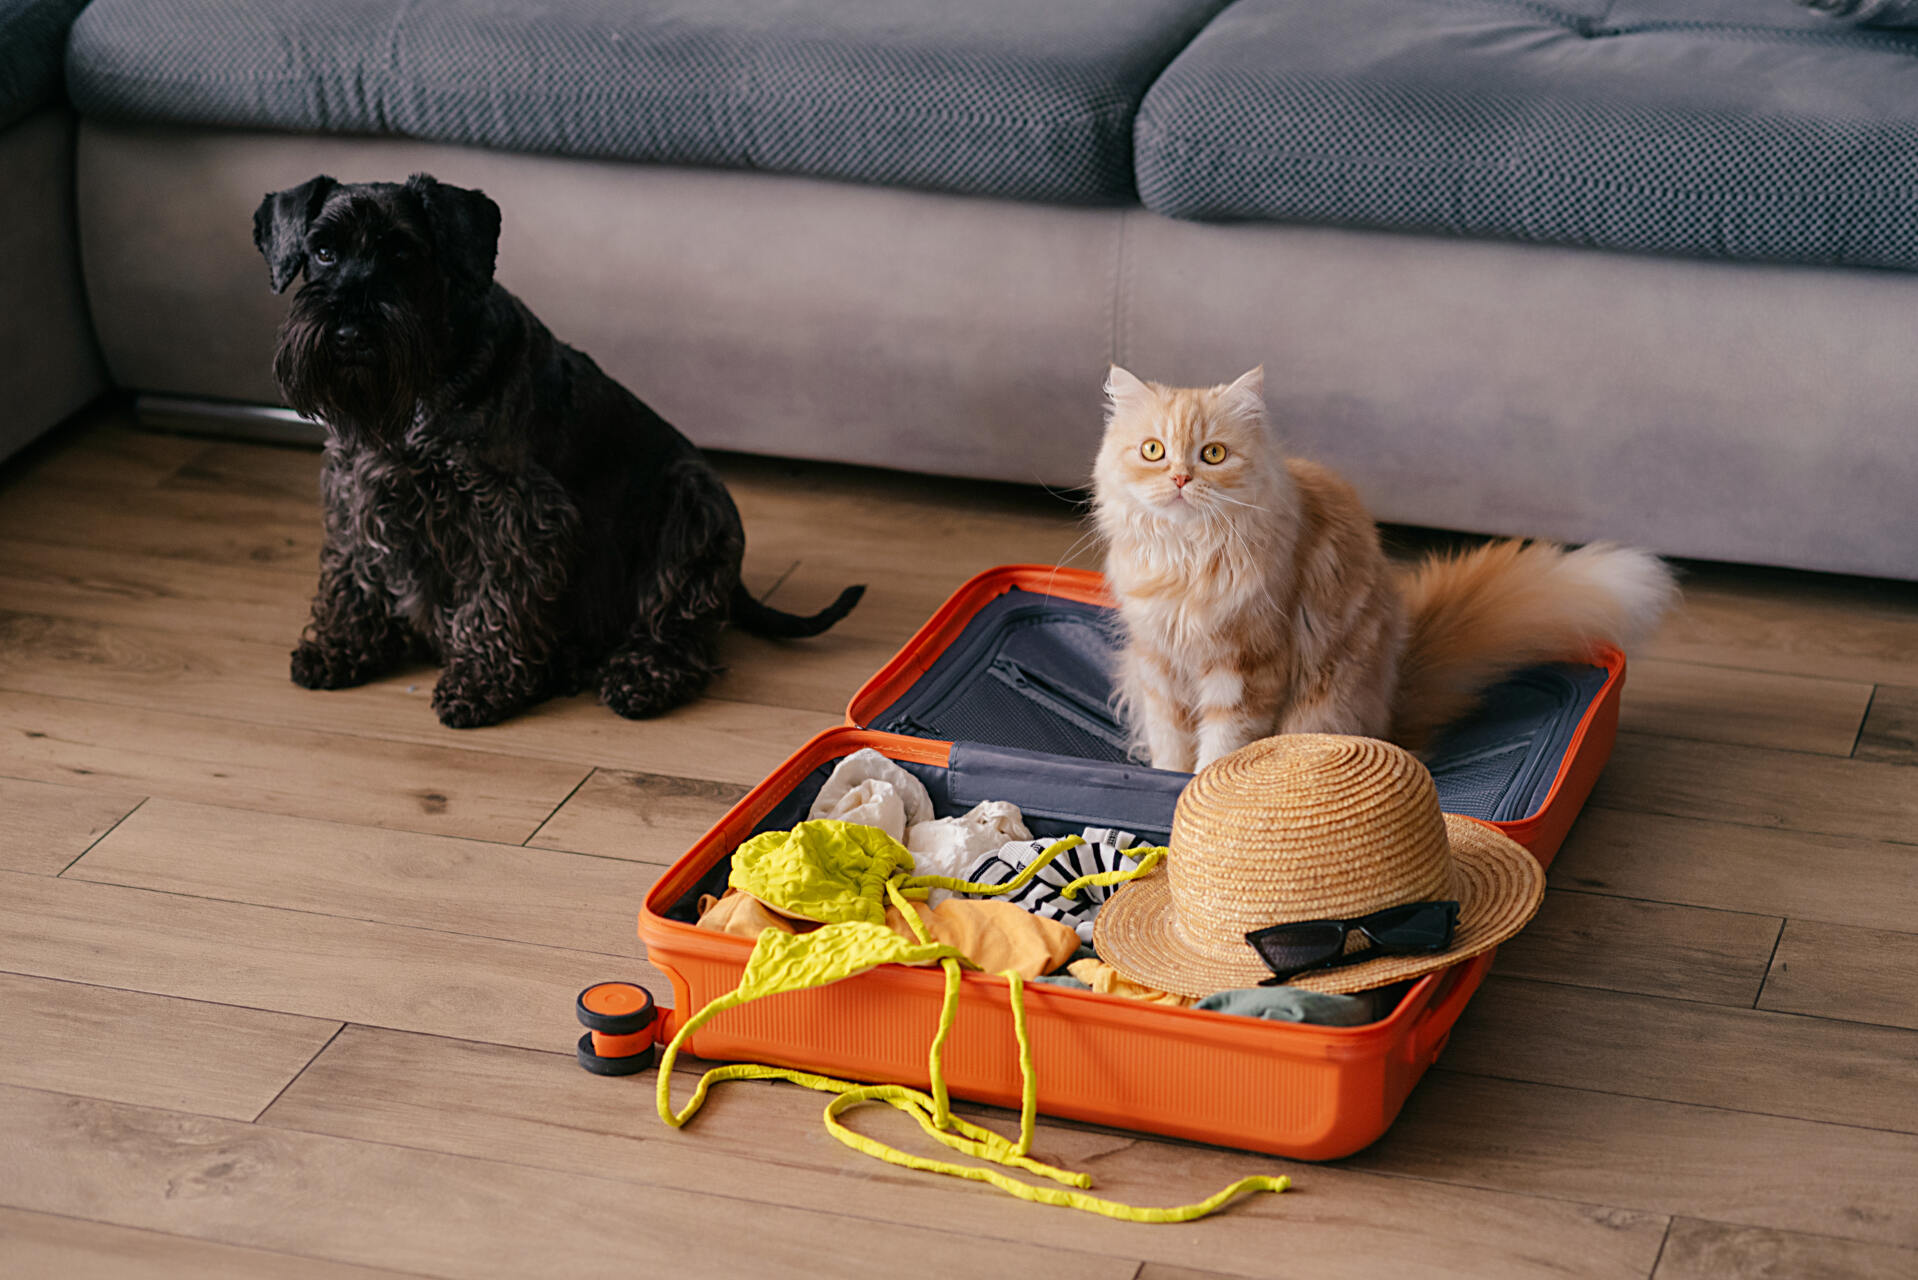 A dog and cat sitting next to an open suitcase